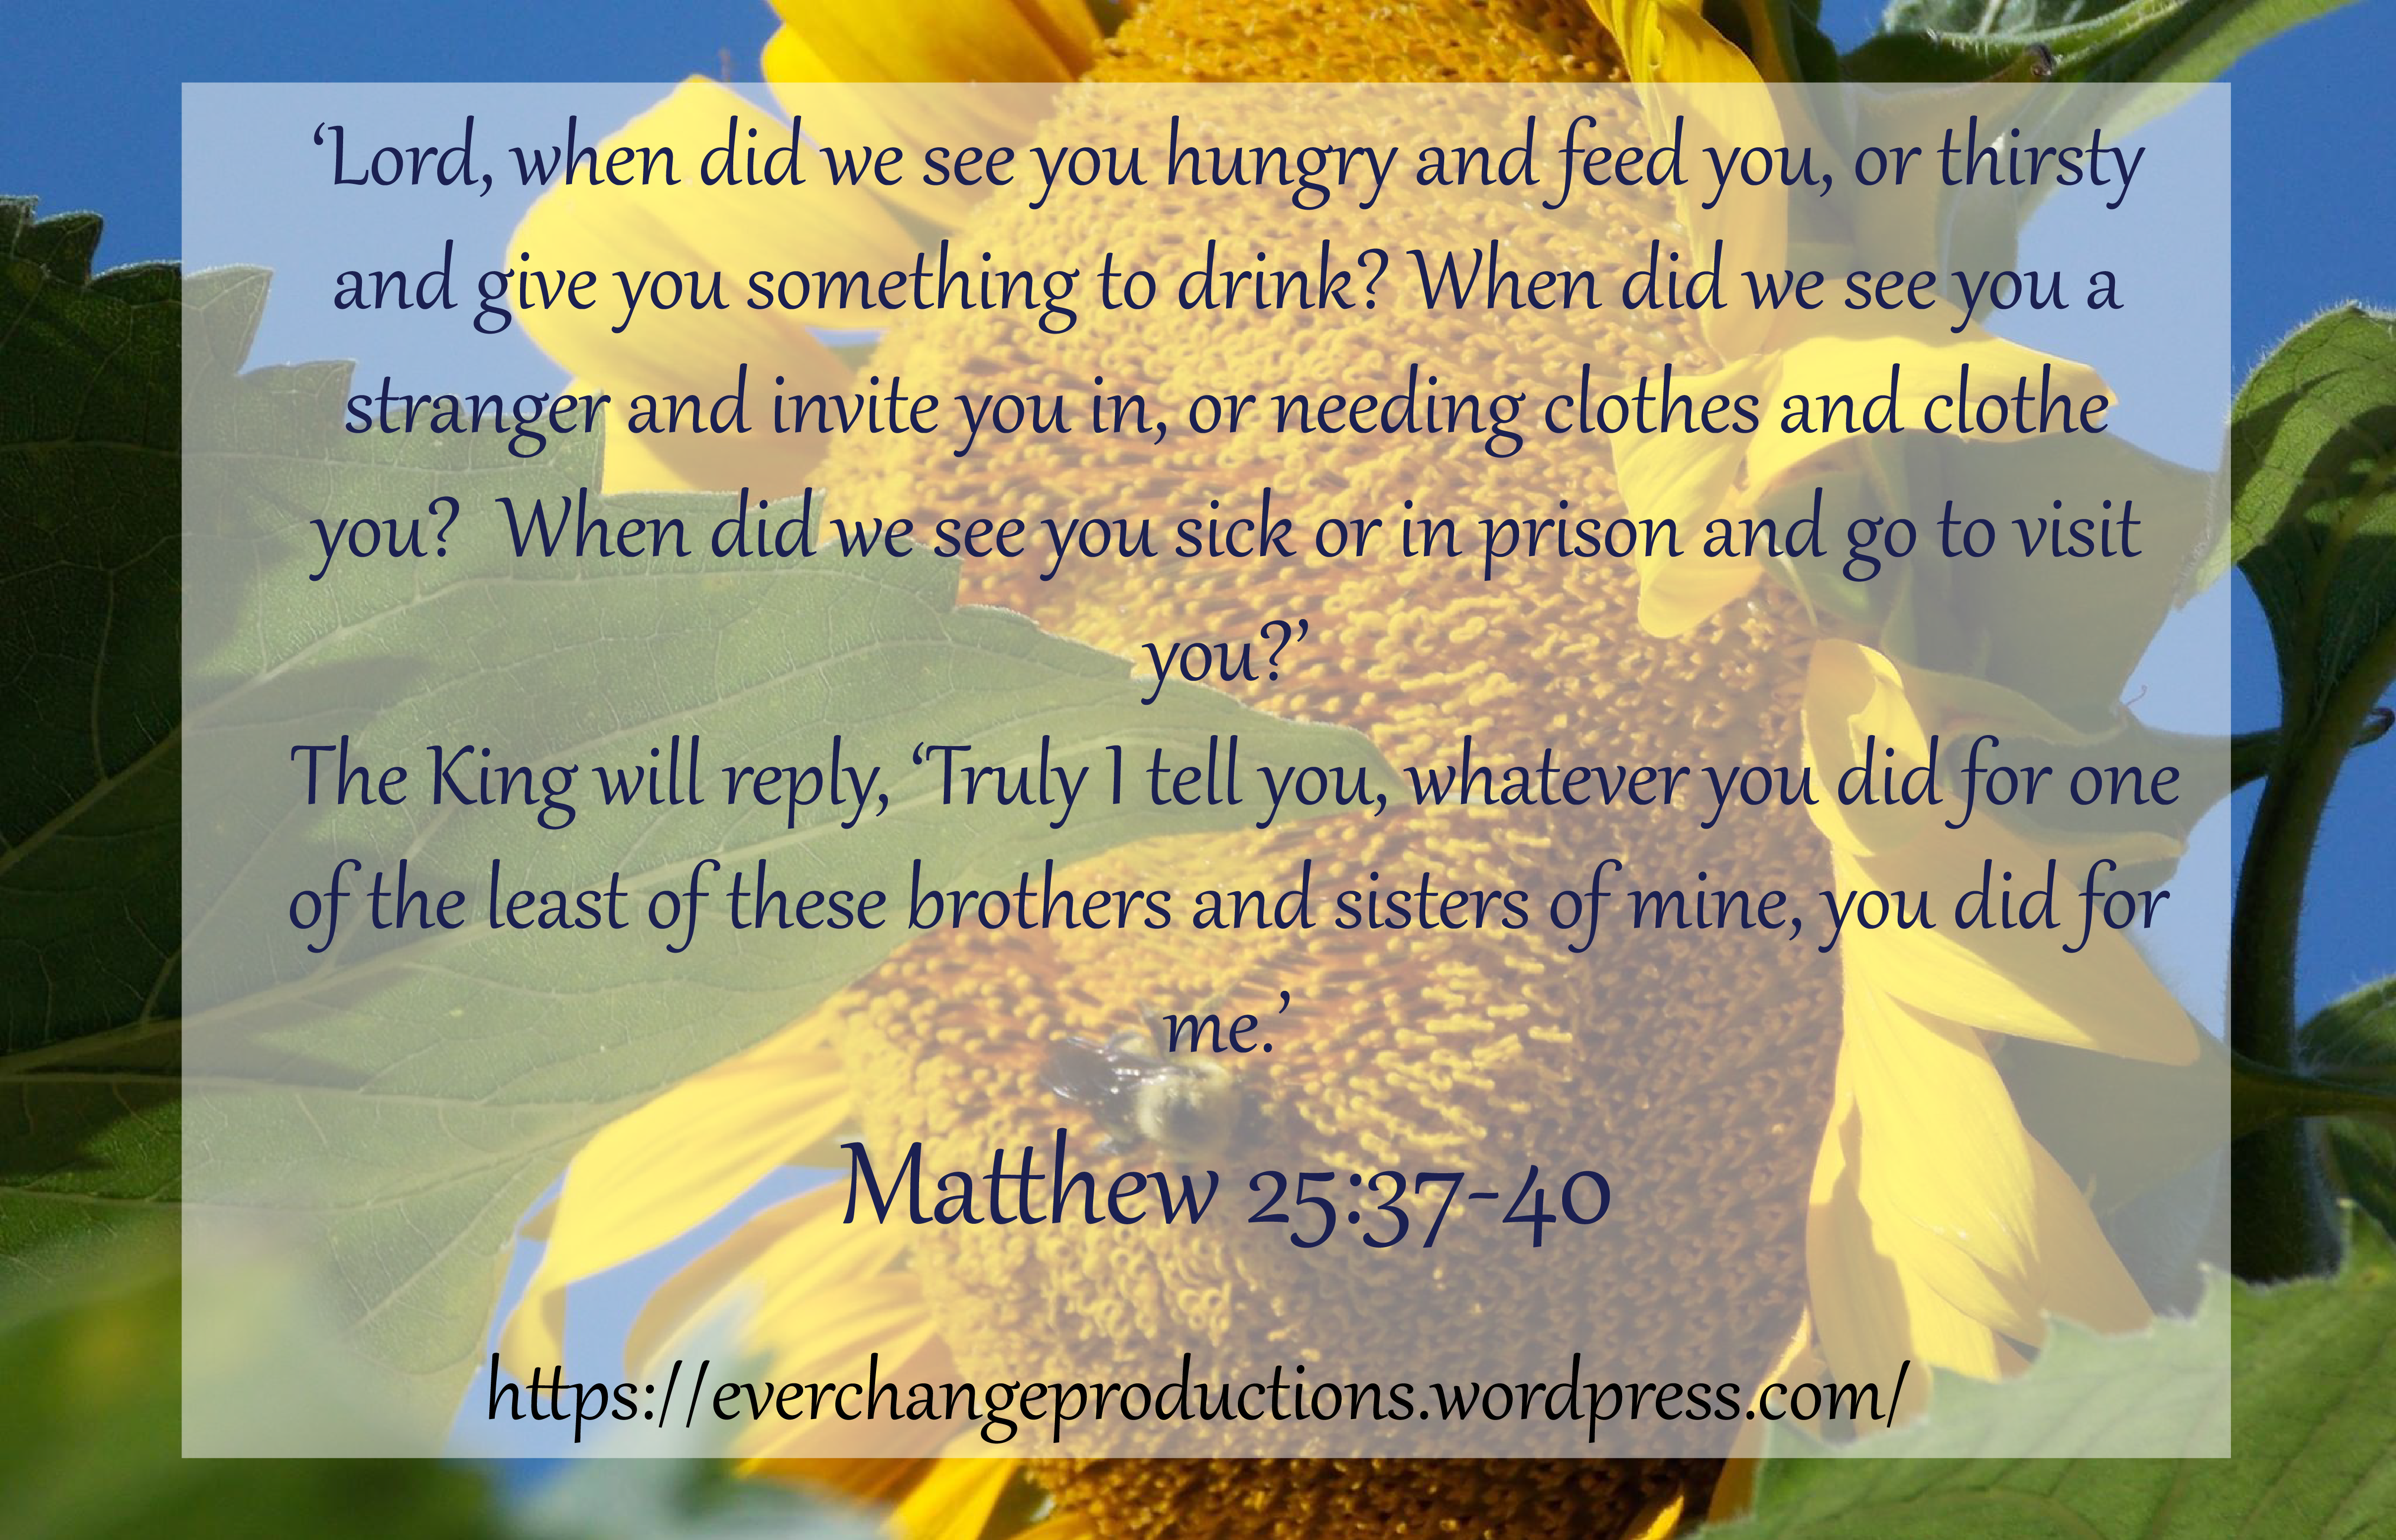 How to Care for God's Creations Matthew 25:37-40